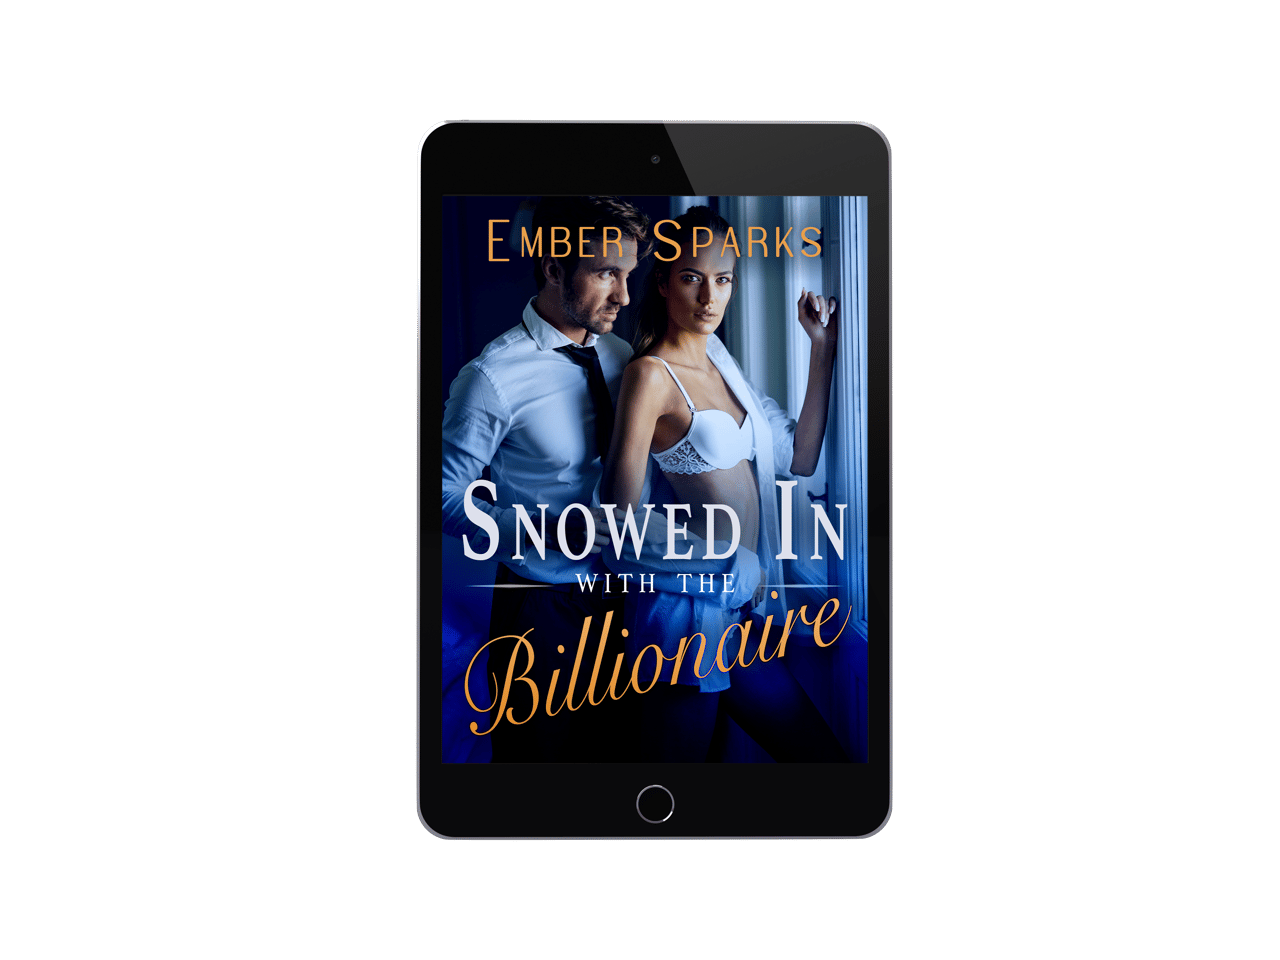 The Snowed in with the Billionaire book cover rendered on an ipad or other tablet